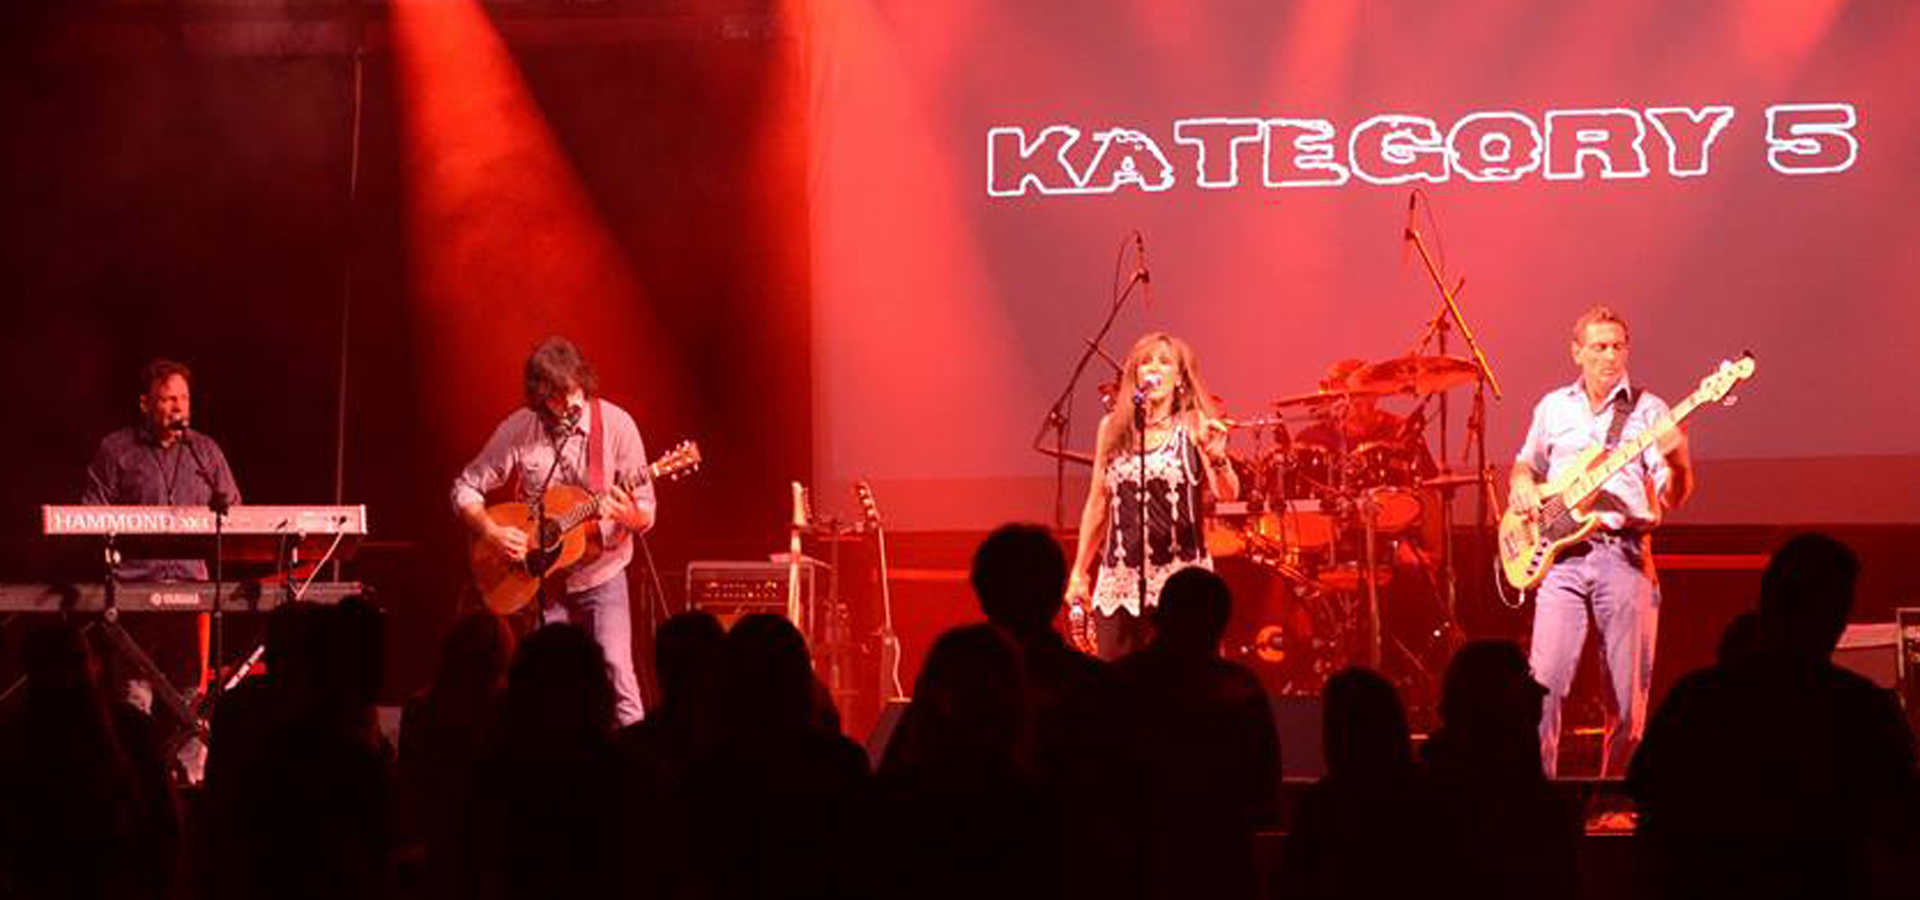 Kategory 5 - Classic Rock Cover Band